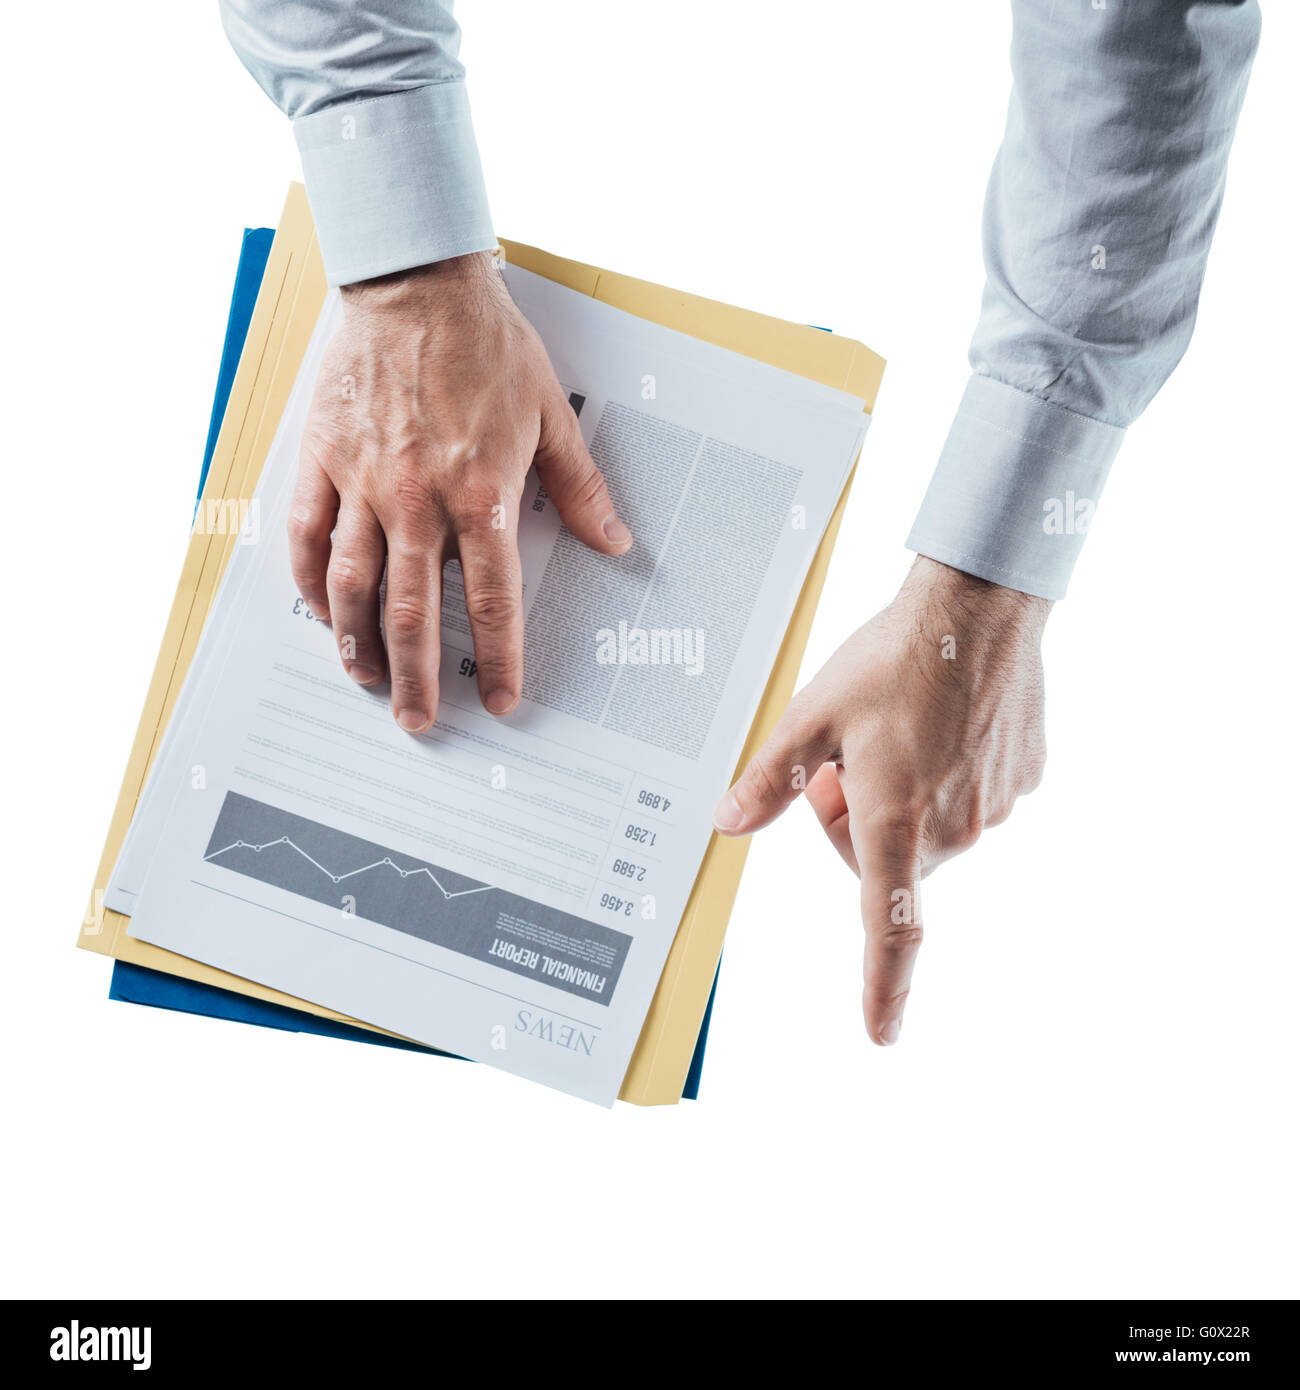 Businessman holding a financial report and pointing on white background, hands close up, top view Stock Photo